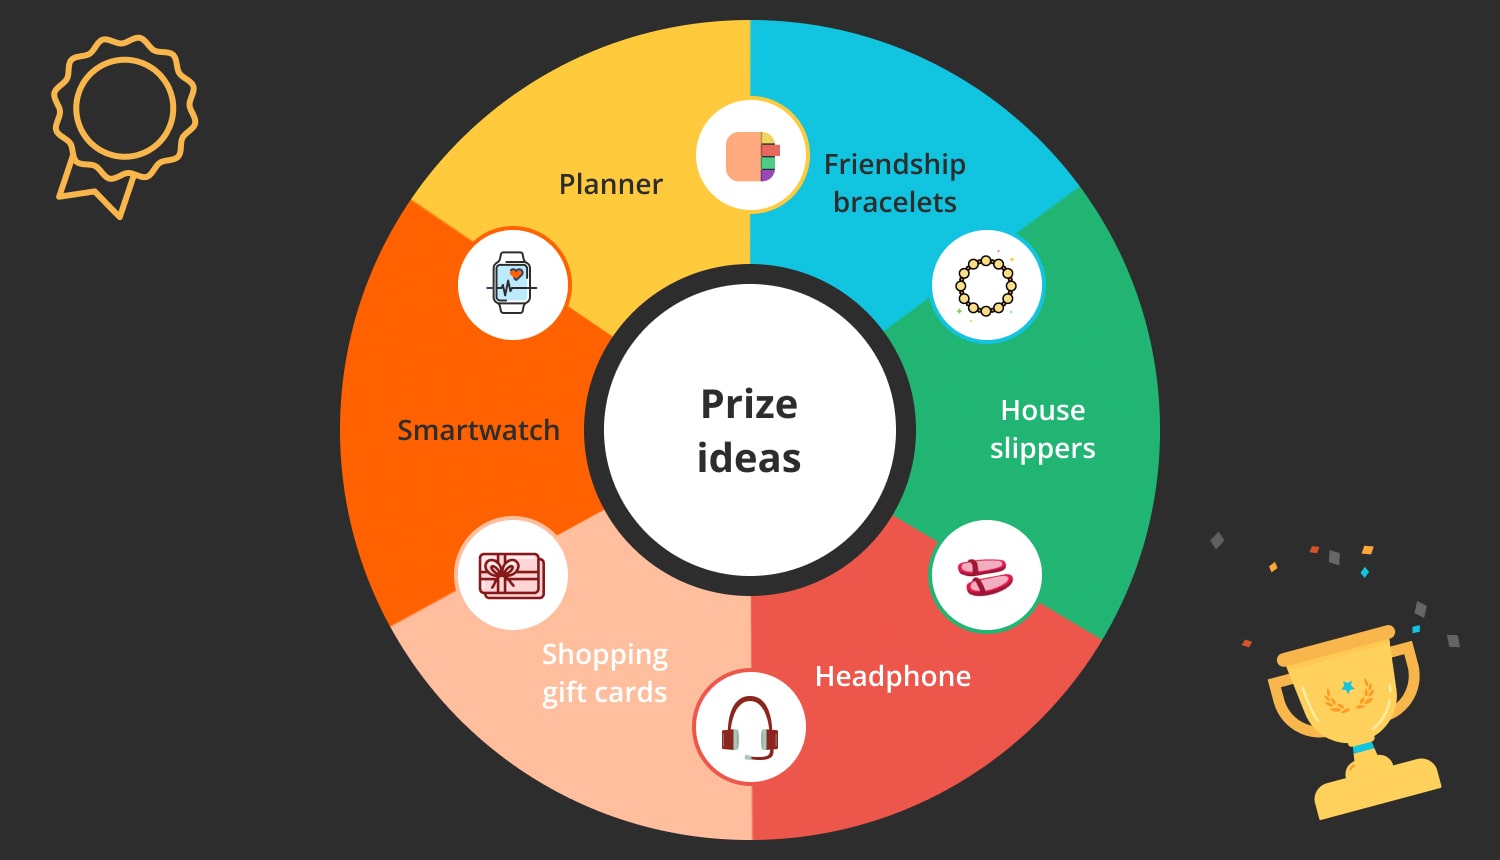 A complete guide to giveaways: Methods, ideas & examples 